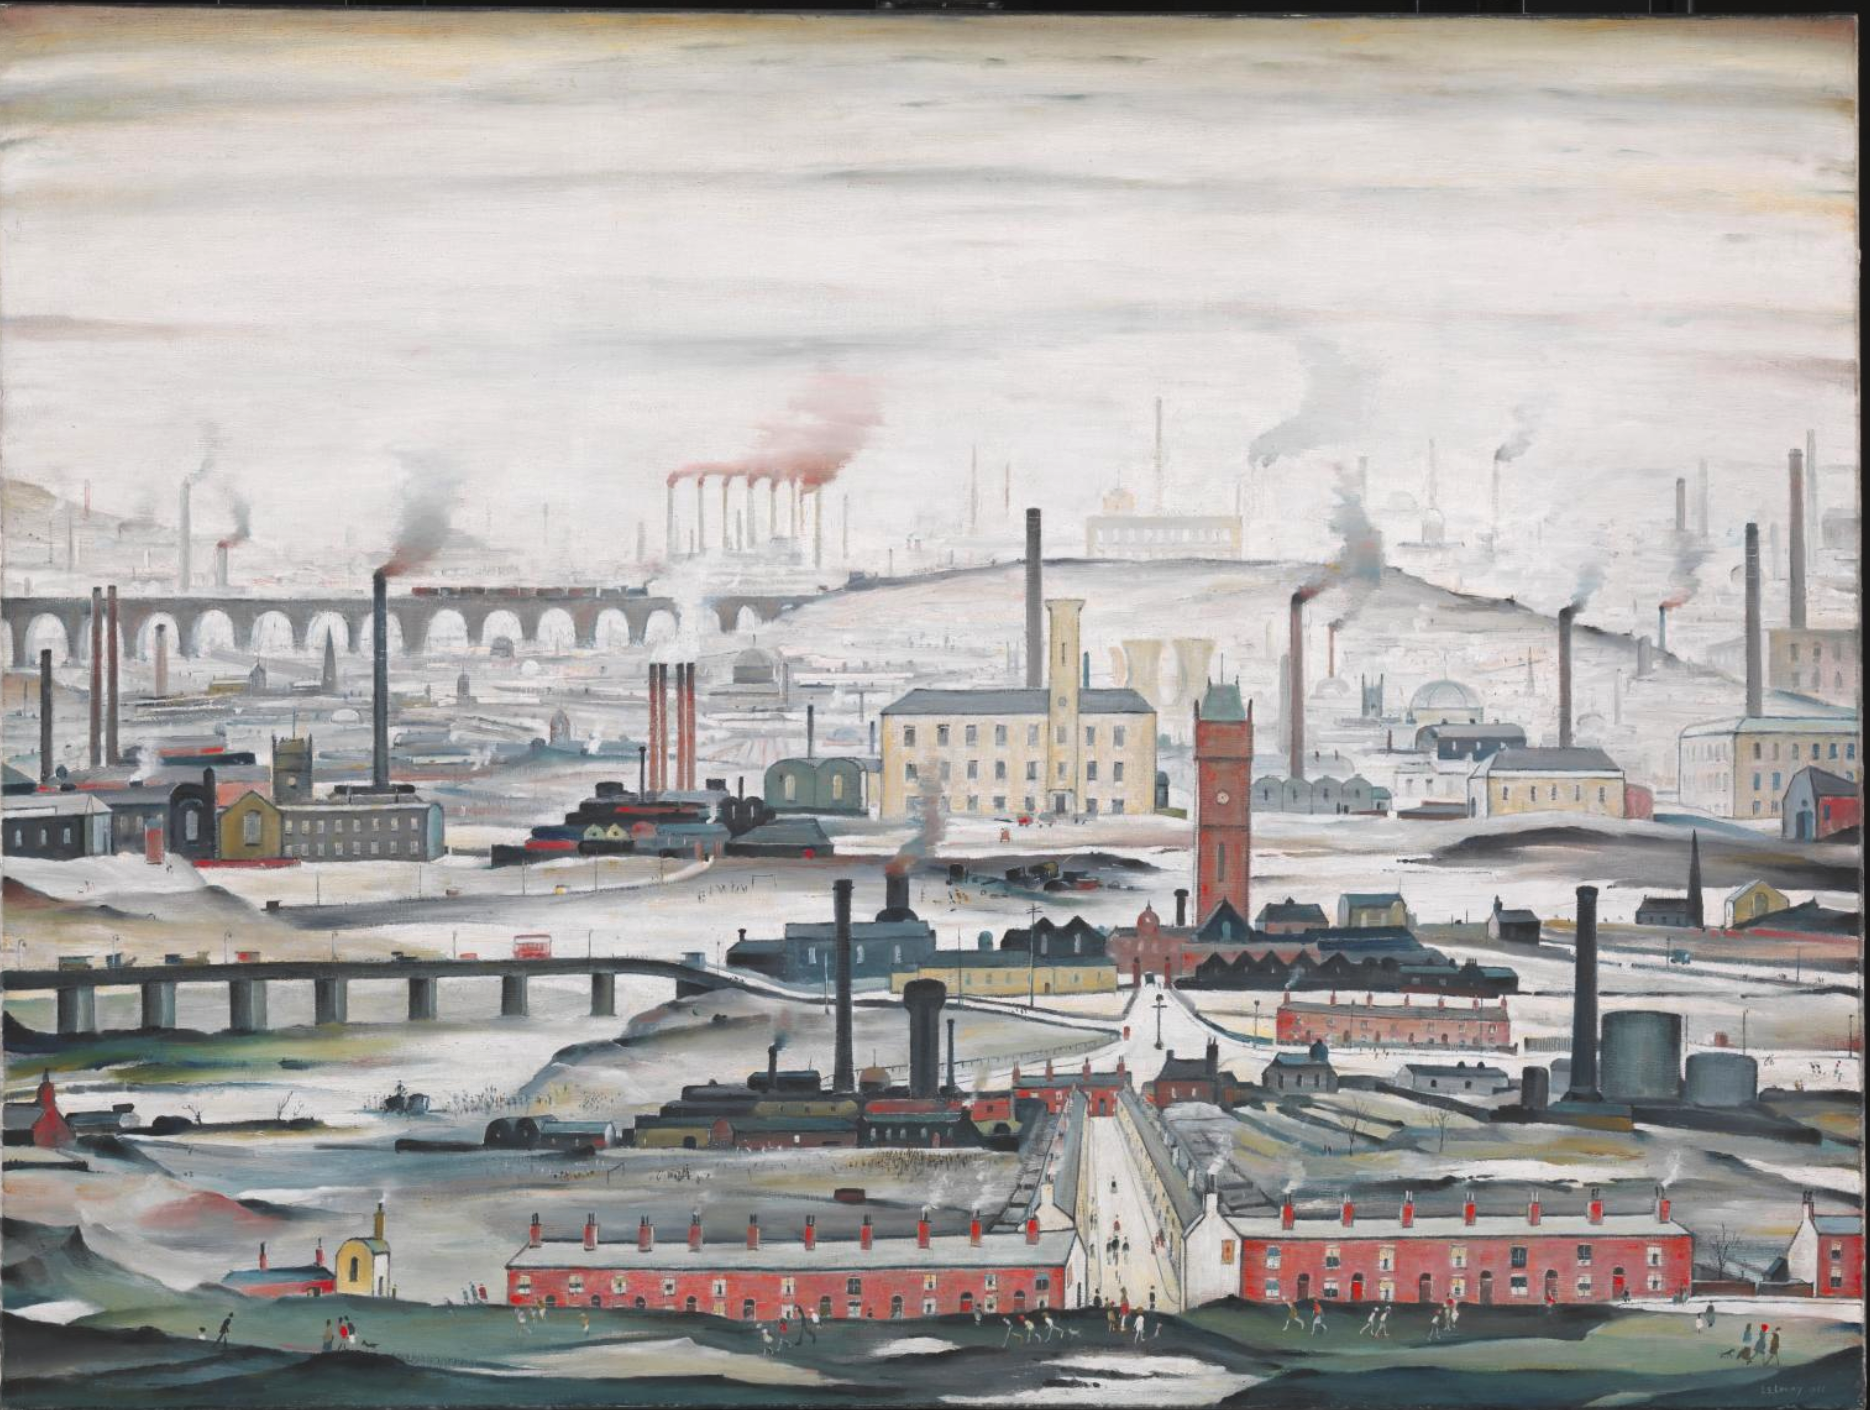 Industrial Landscape (1955) by Laurence Stephen Lowry (1887 - 1976), English artist.